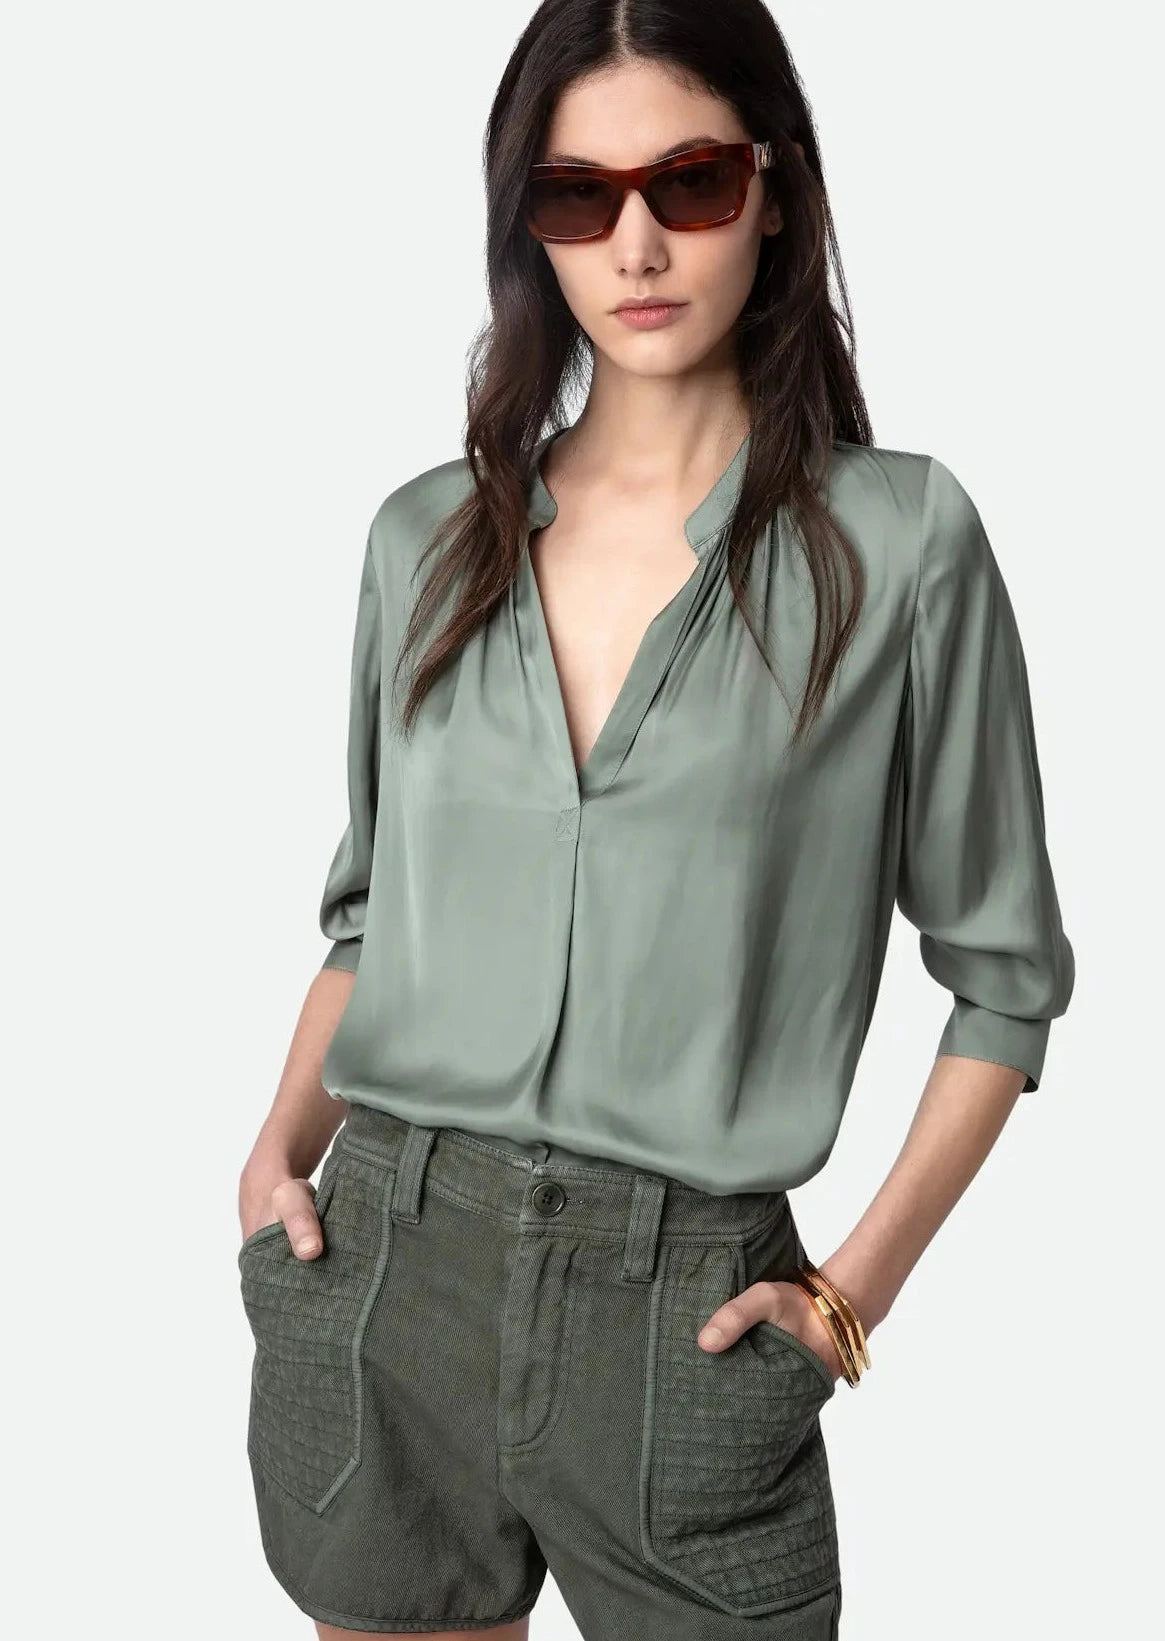 Zadig & Voltaire Tink Satin Blouse - Olive